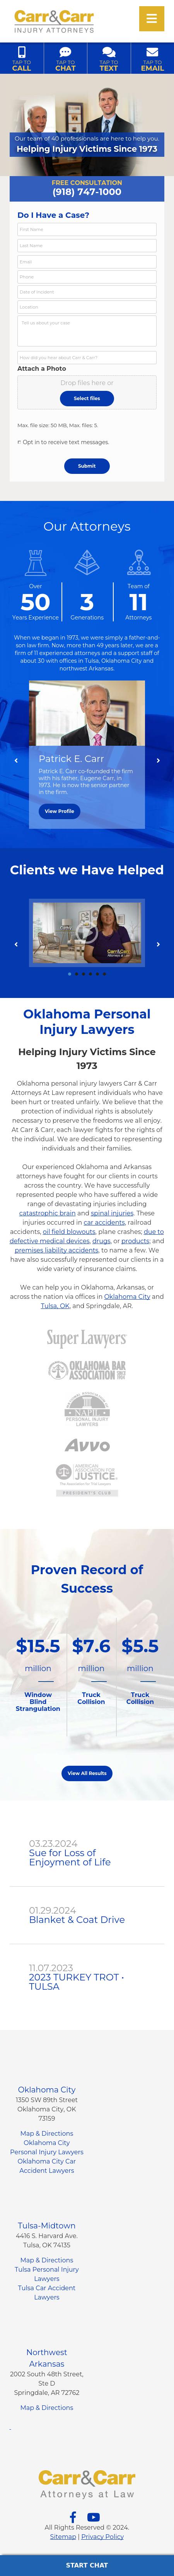 Carr & Carr, Attorneys at Law - Oklahoma City OK Lawyers